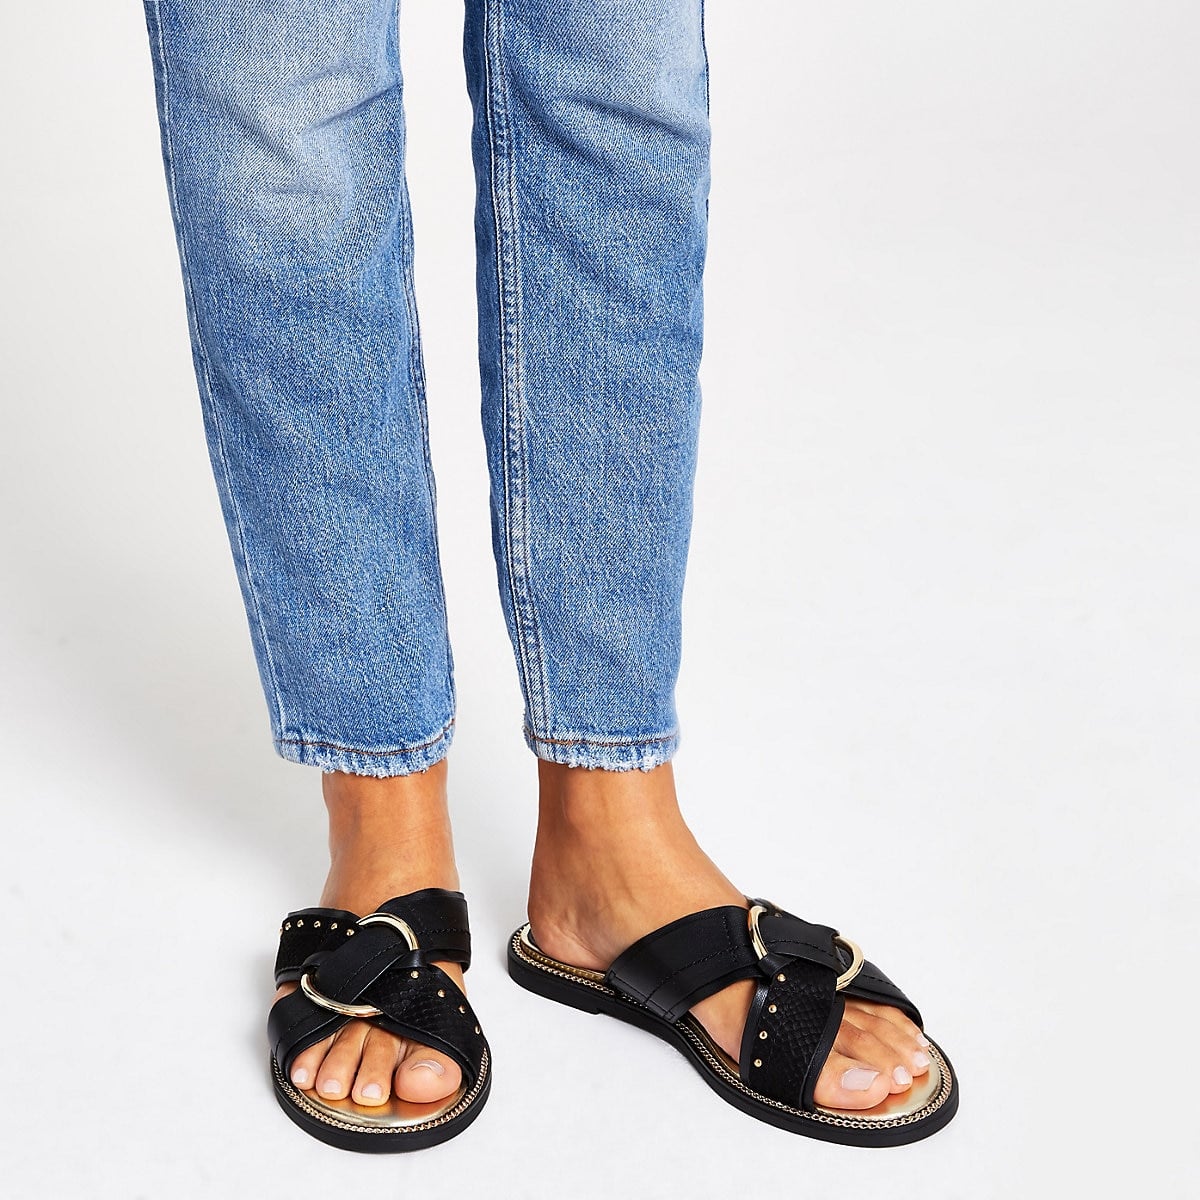 Comfortable Sandals For Wide Feet 